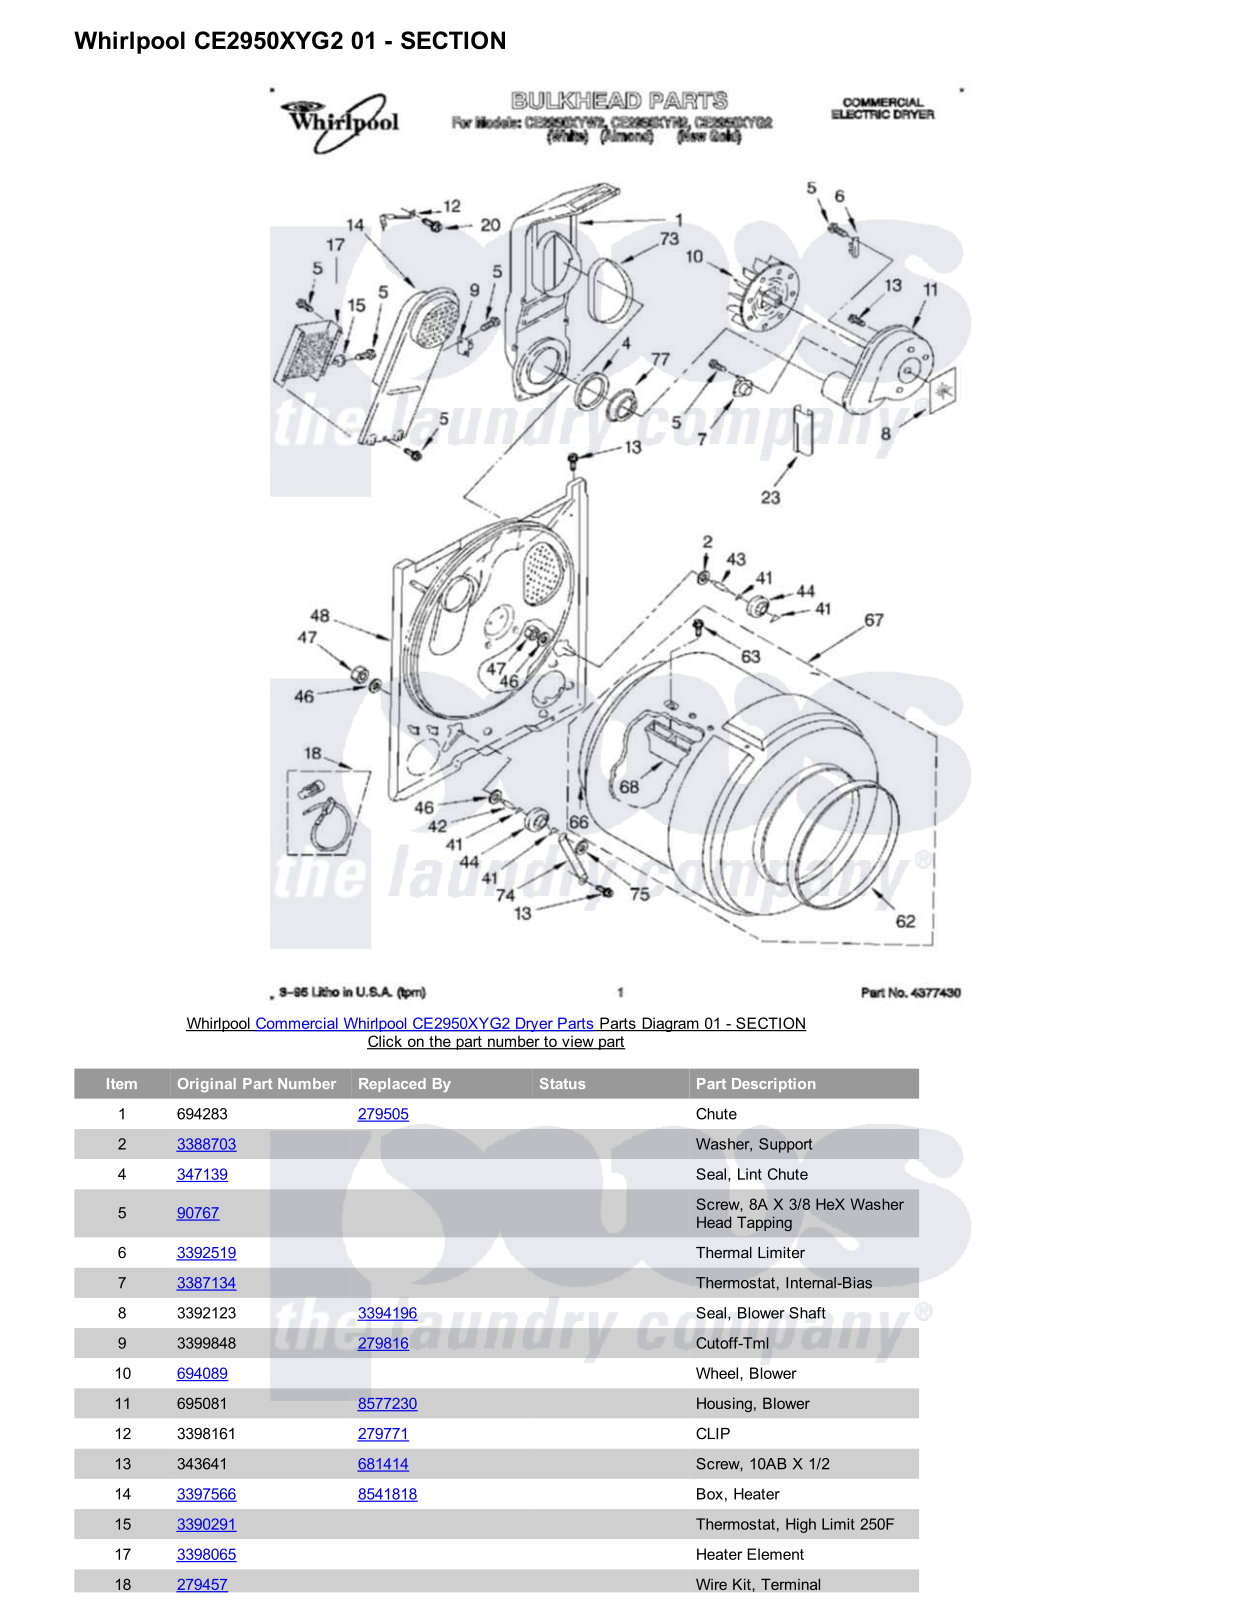 Whirlpool CE2950XYG2 Parts Diagram